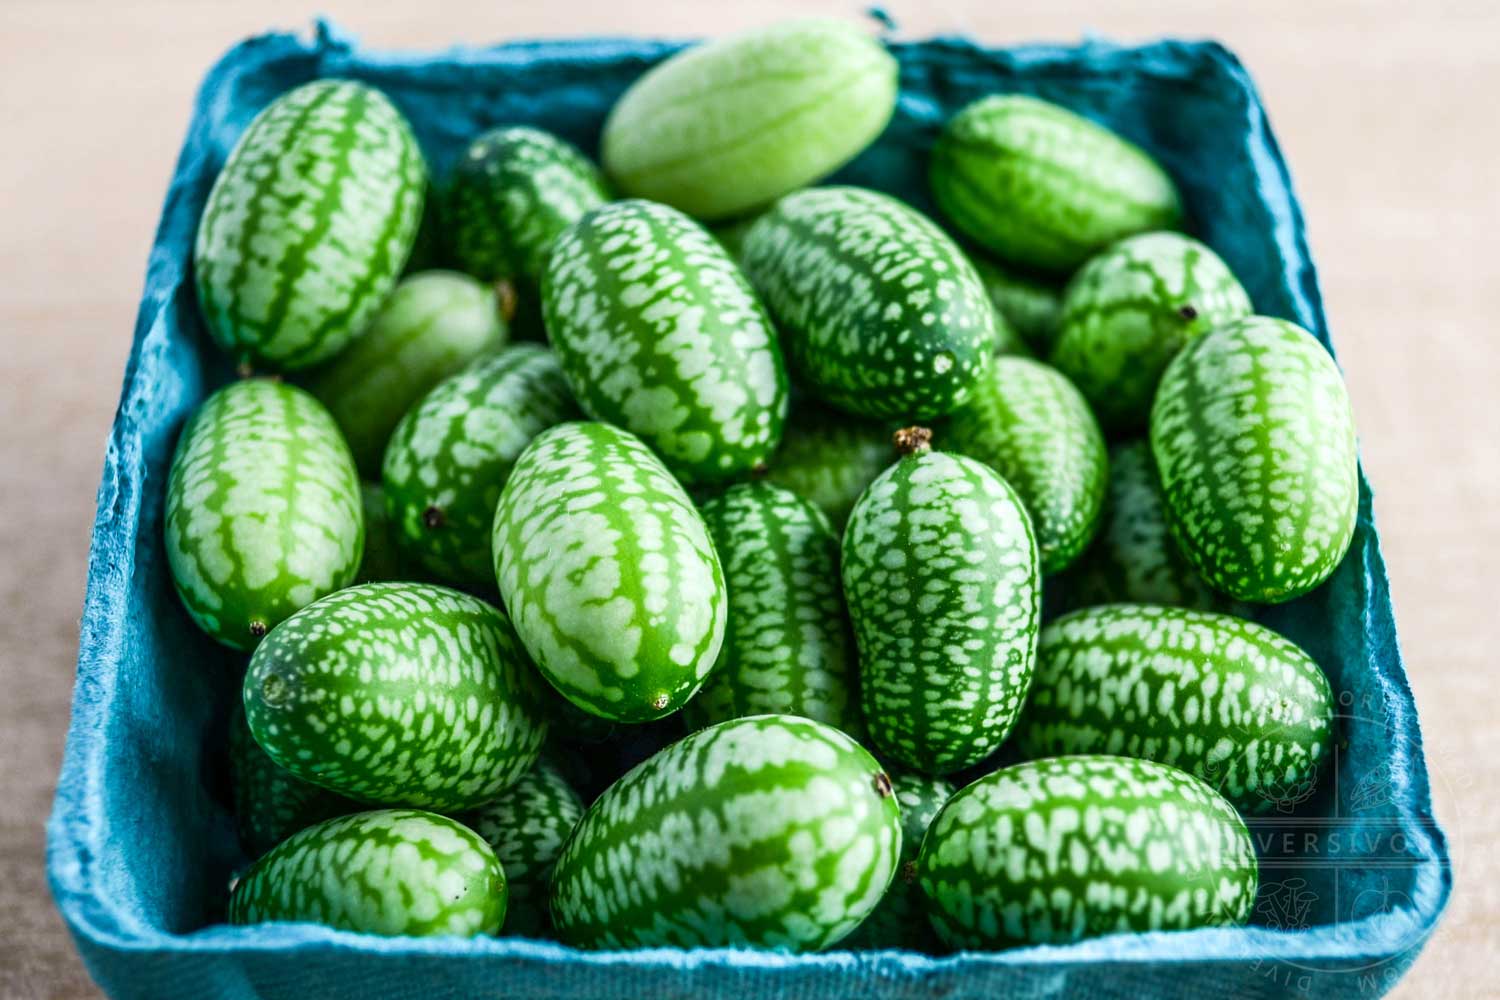 Cucamelons - How to Choose, Use & Cook Them